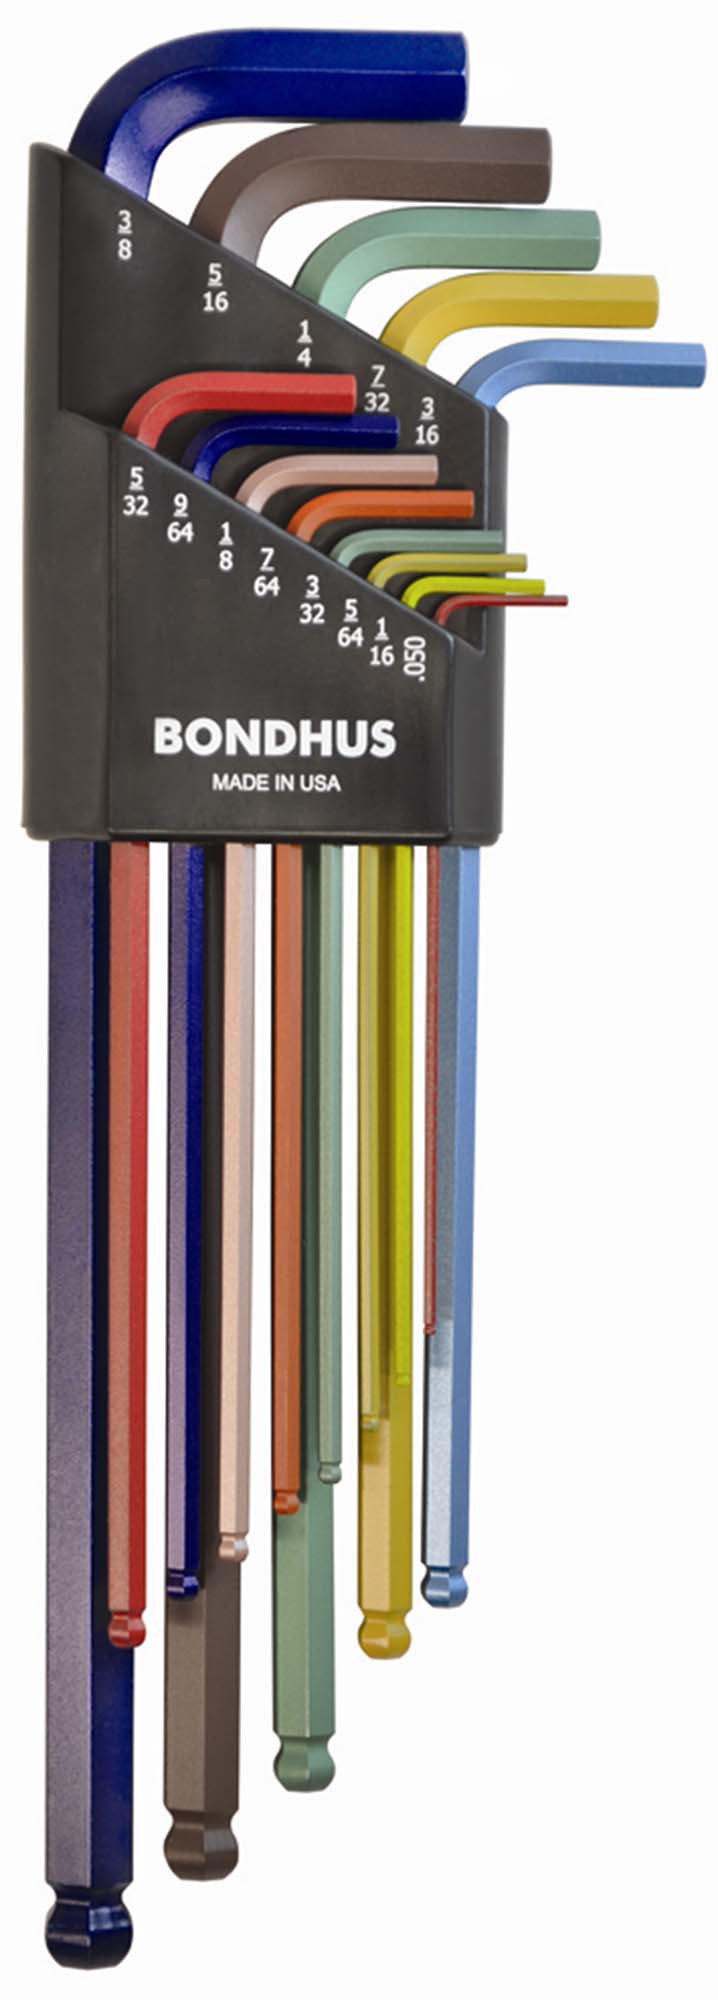 Bondhus 69637 .050-3/8" ColorGuard L-Wrench Ball End Hex Hey Set, Set of 13 - Extra Long